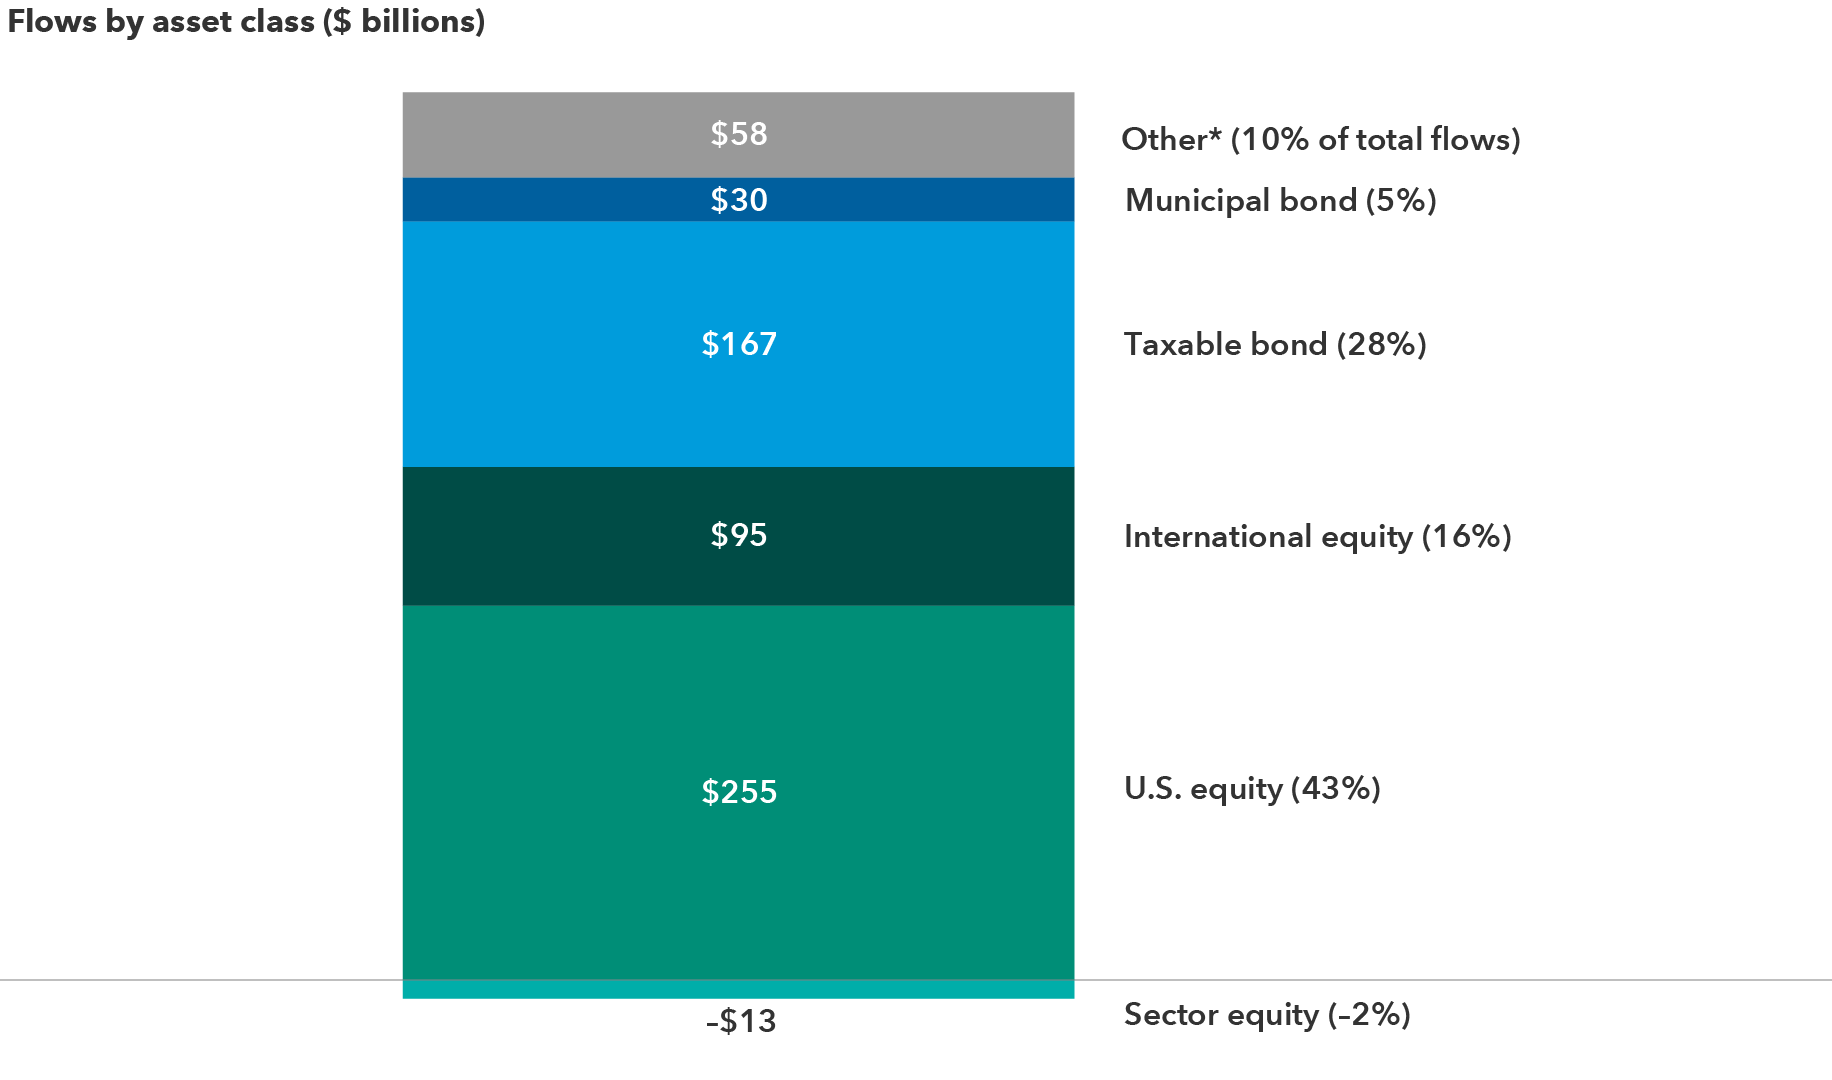 A stacked bar chart showing the 2022 ETF flows for various asset classes. Sector equity ETFs had $13 billion of outflows, resulting in a negative 2% impact to overall ETF flows. U.S. equity ETFs gathered $255 billion, or 43% of inflows; international equity ETFs gathered $95 billion, or 16% of inflows; taxable bond ETFs gathered $167 billion, or 28% of inflows; municipal bond ETFs gathered $30 billion, or 5% of inflows; and all other categories gathered $58 billion, or 10% of inflows.